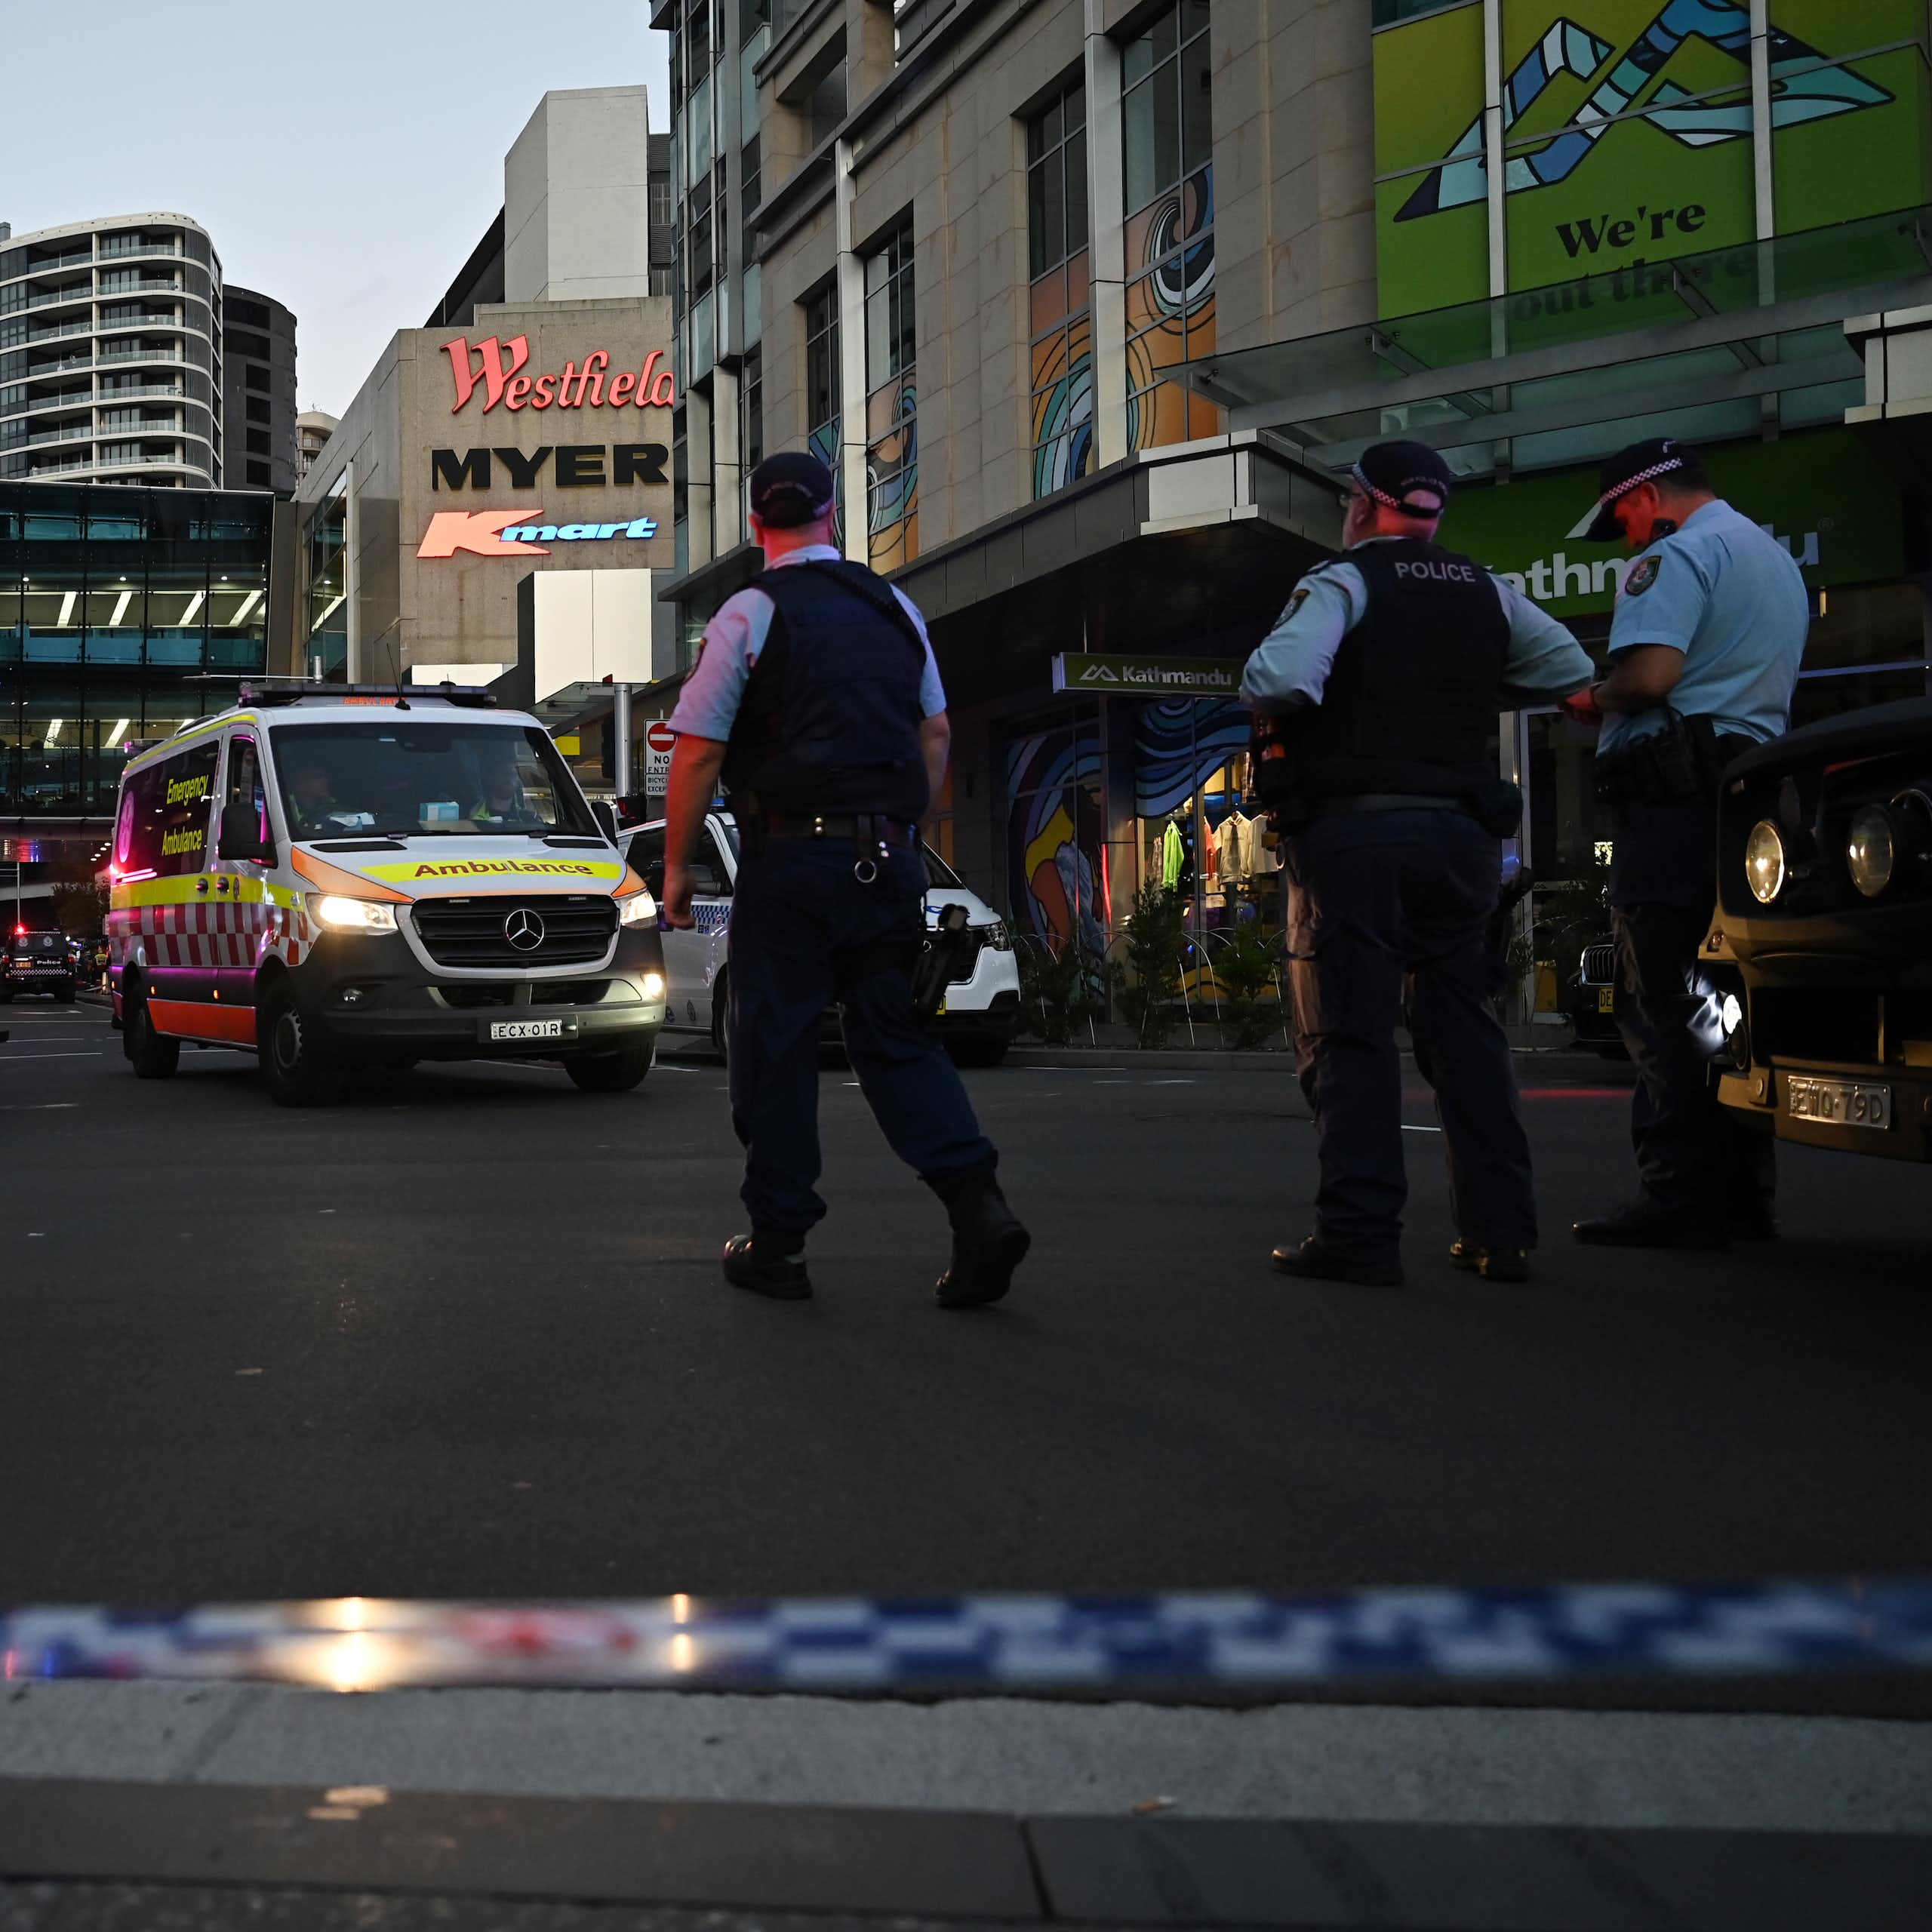 Sydneysiders witnessed horrific scenes. How do you process and recover from such an event?